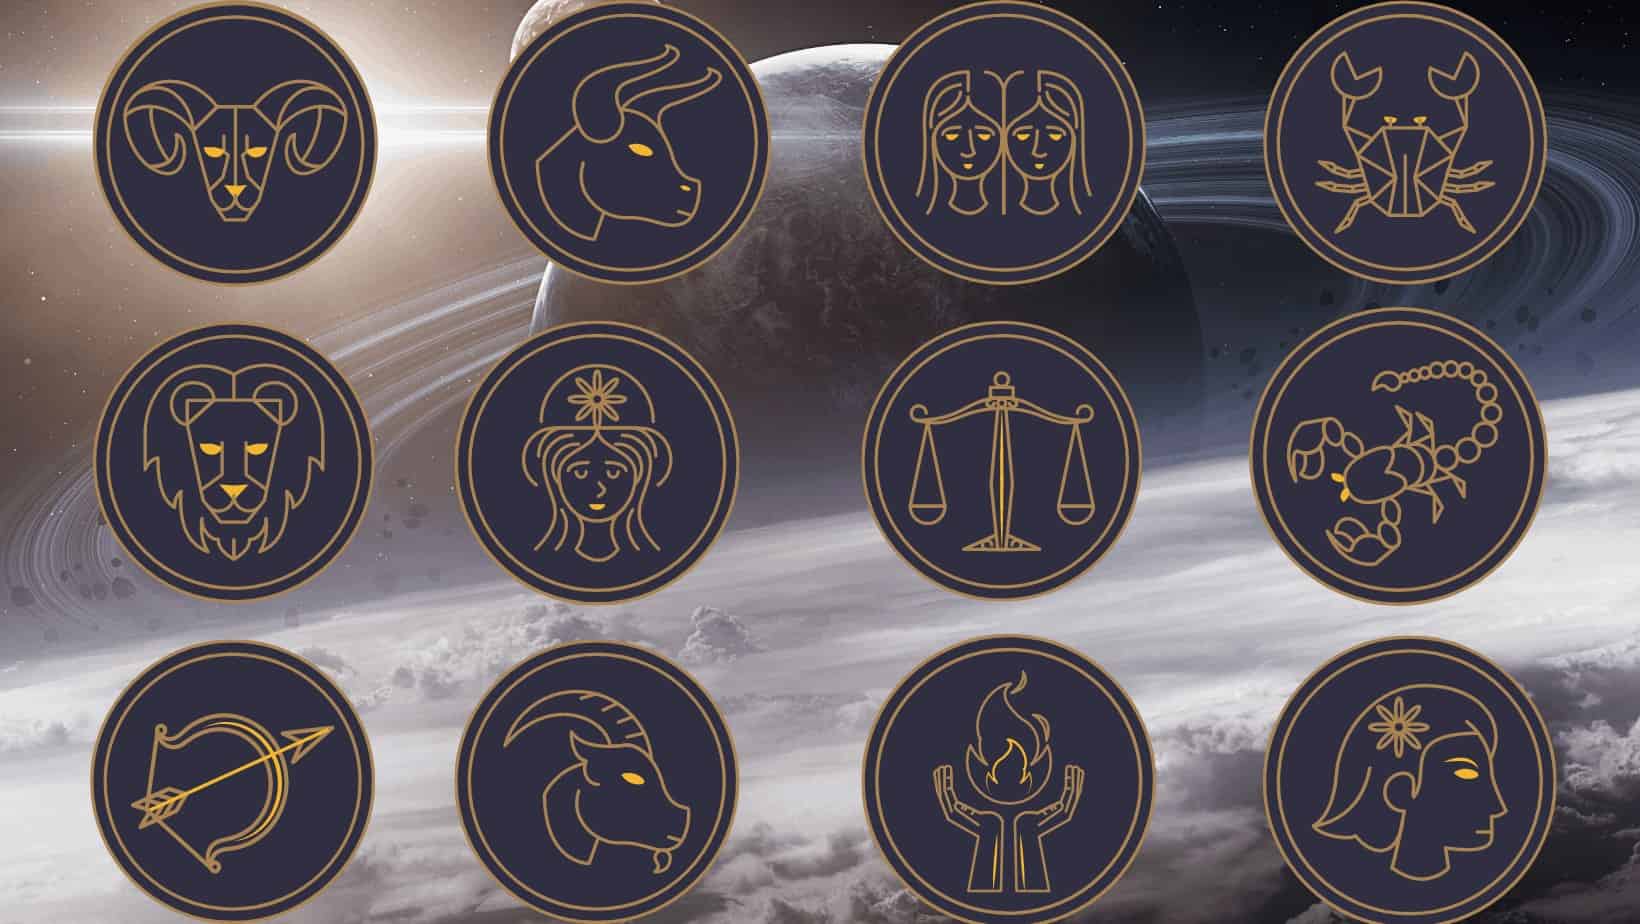 What Does Your October 2021 Horoscope Reveal According to Your Zodiac Sign?